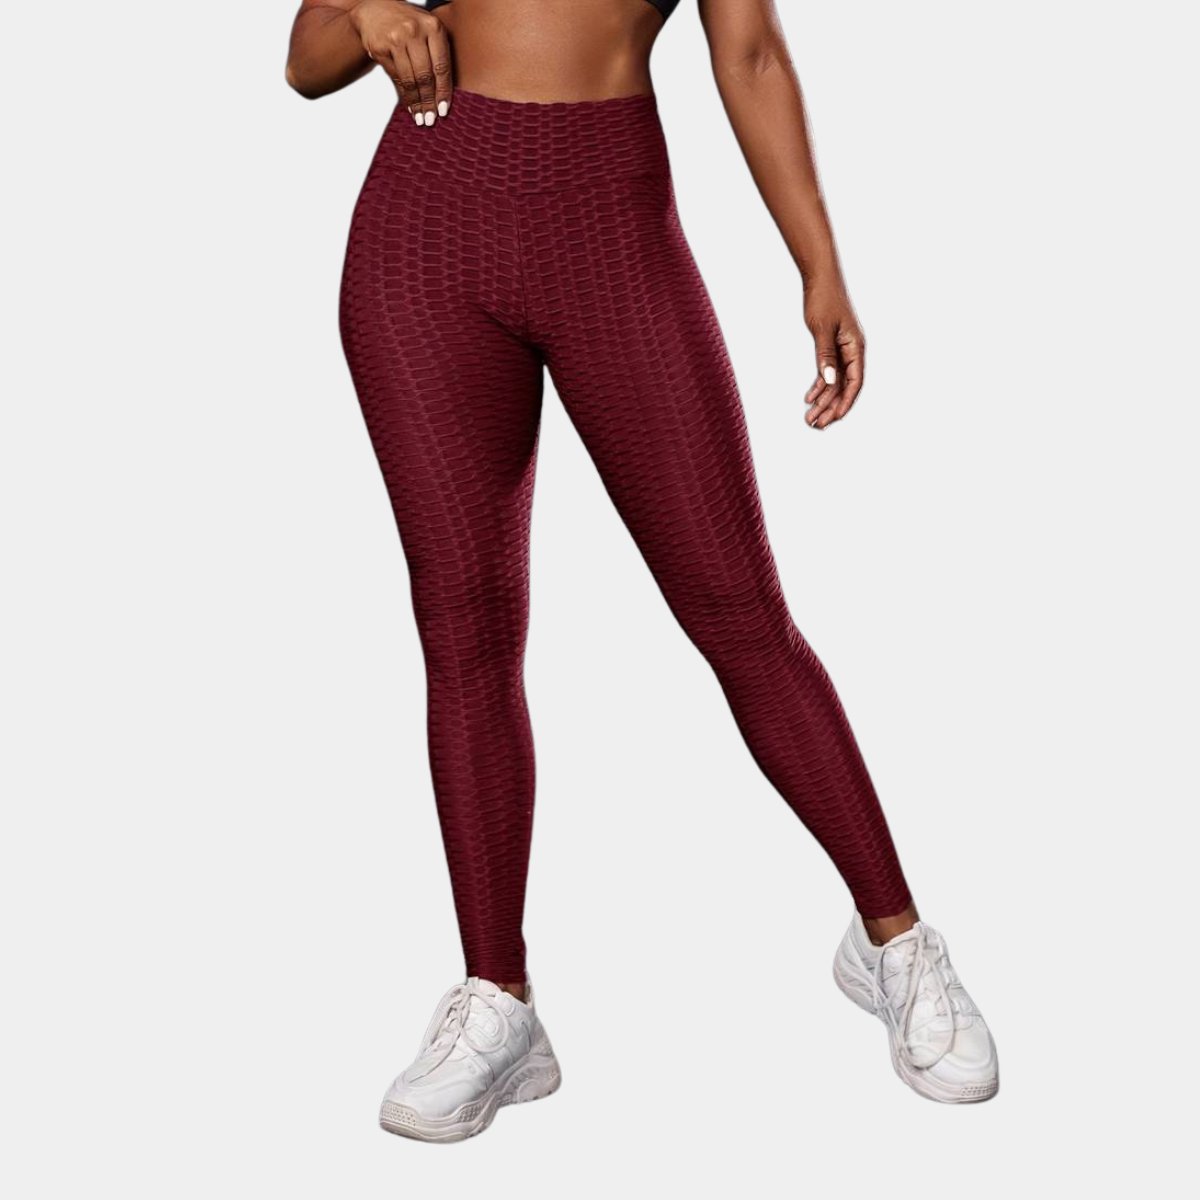 Ladies Honeycomb Ruched Leggings – You Know Who's